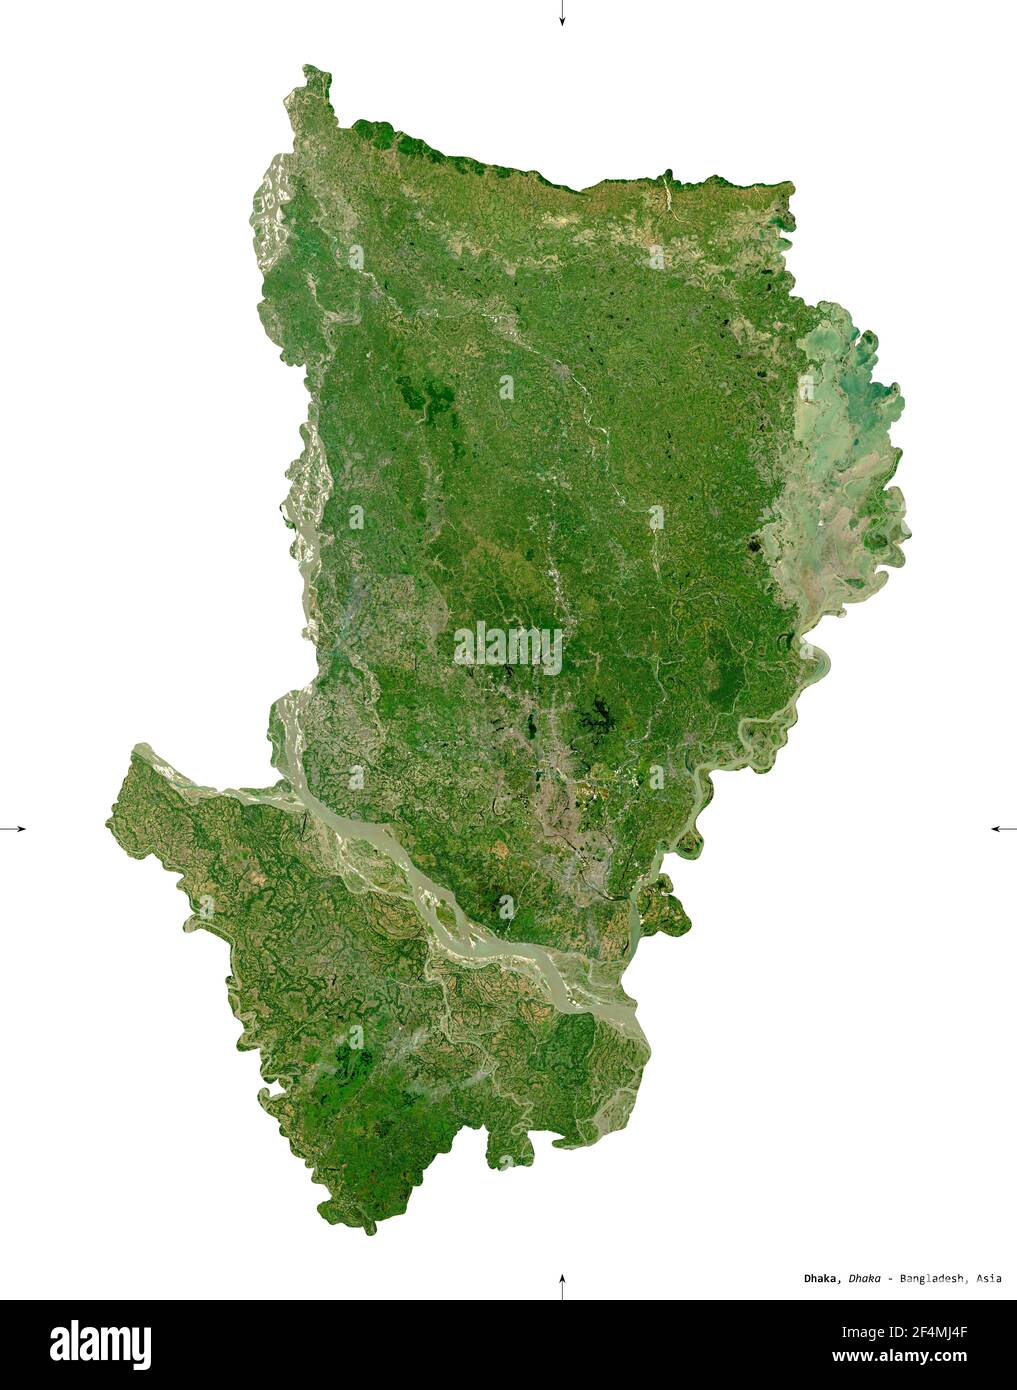 Dhaka, division of Bangladesh. Sentinel-2 satellite imagery. Shape isolated on white solid. Description, location of the capital. Contains modified Co Stock Photo